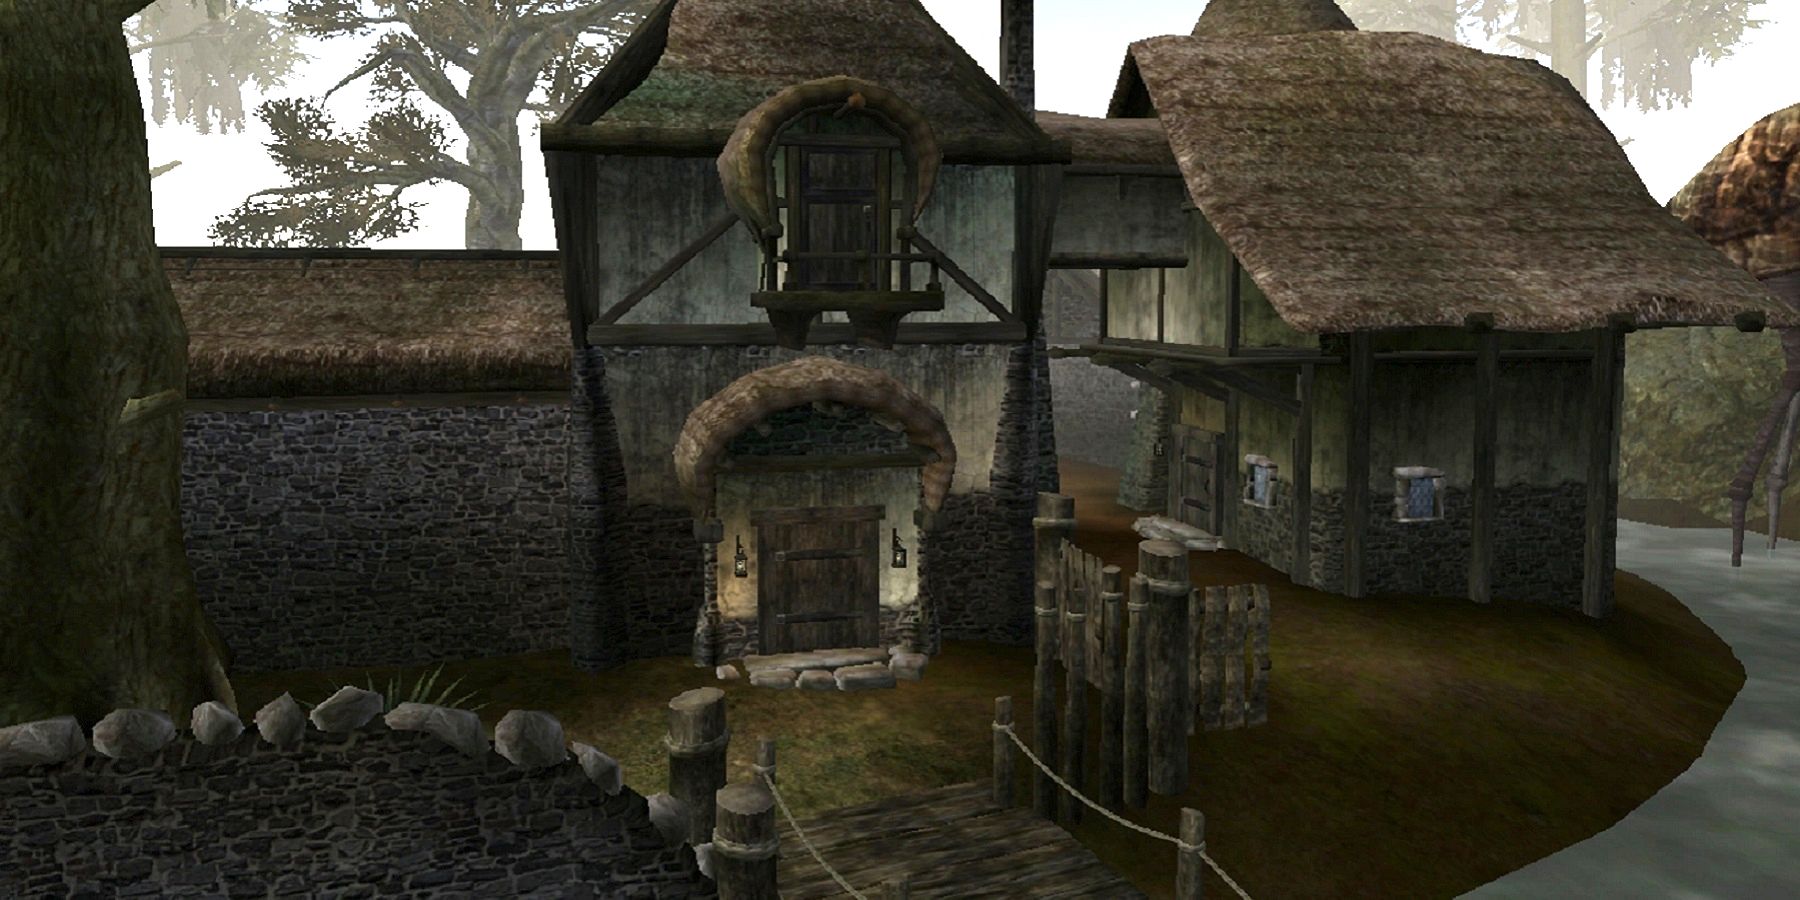 Screenshot from Morrowind showing the Census and Excise Office in Seyda Neen.